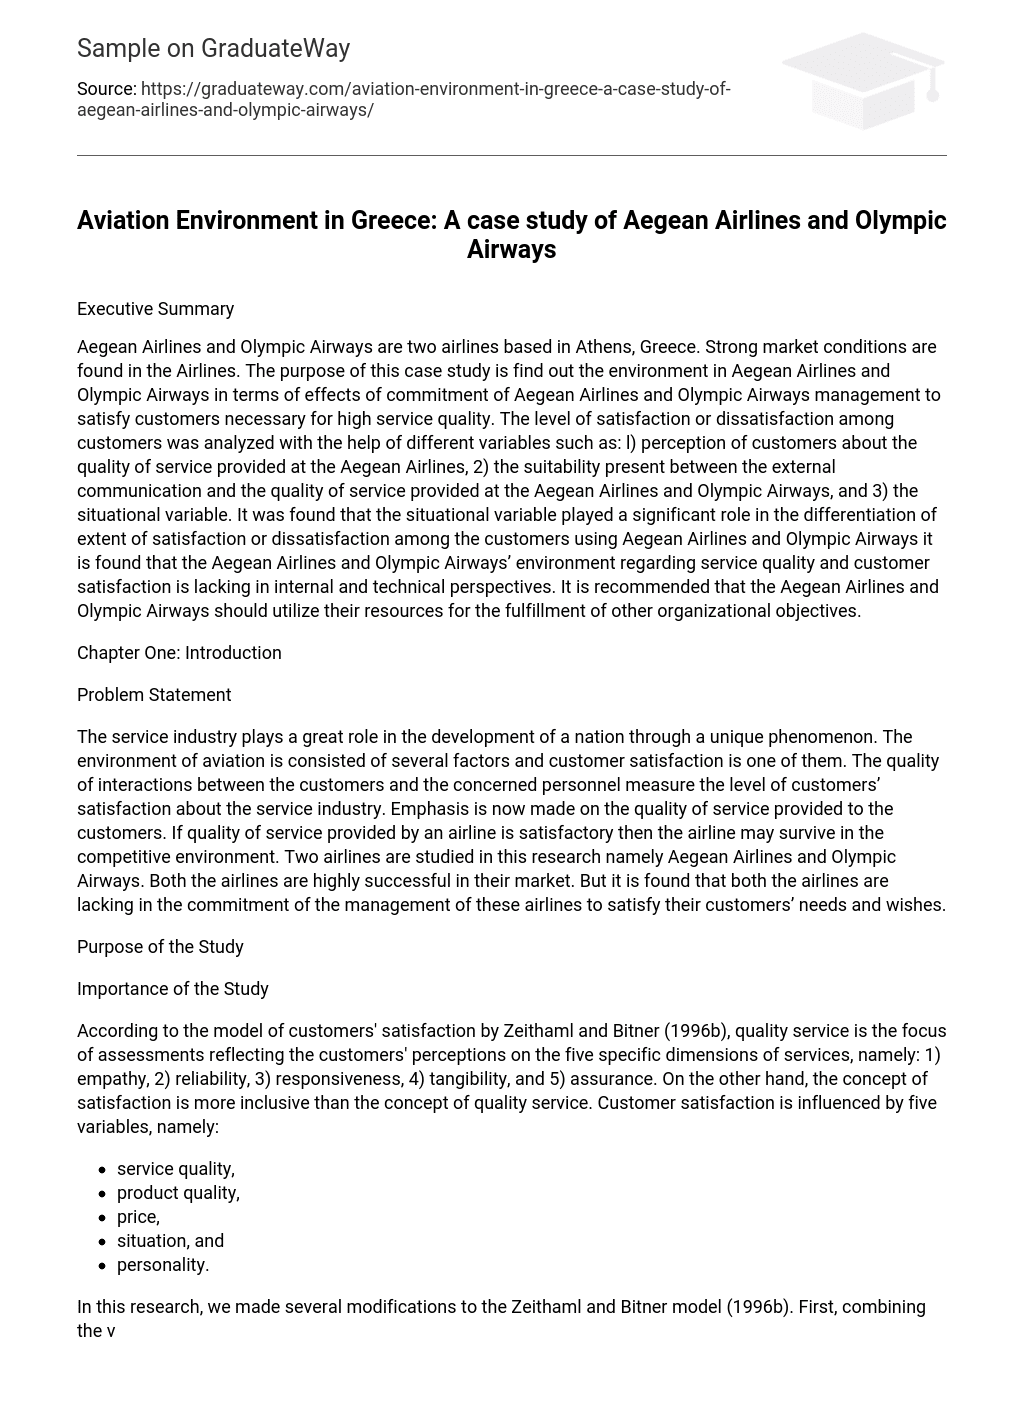 Aviation Environment in Greece: A case study of Aegean Airlines and Olympic Airways